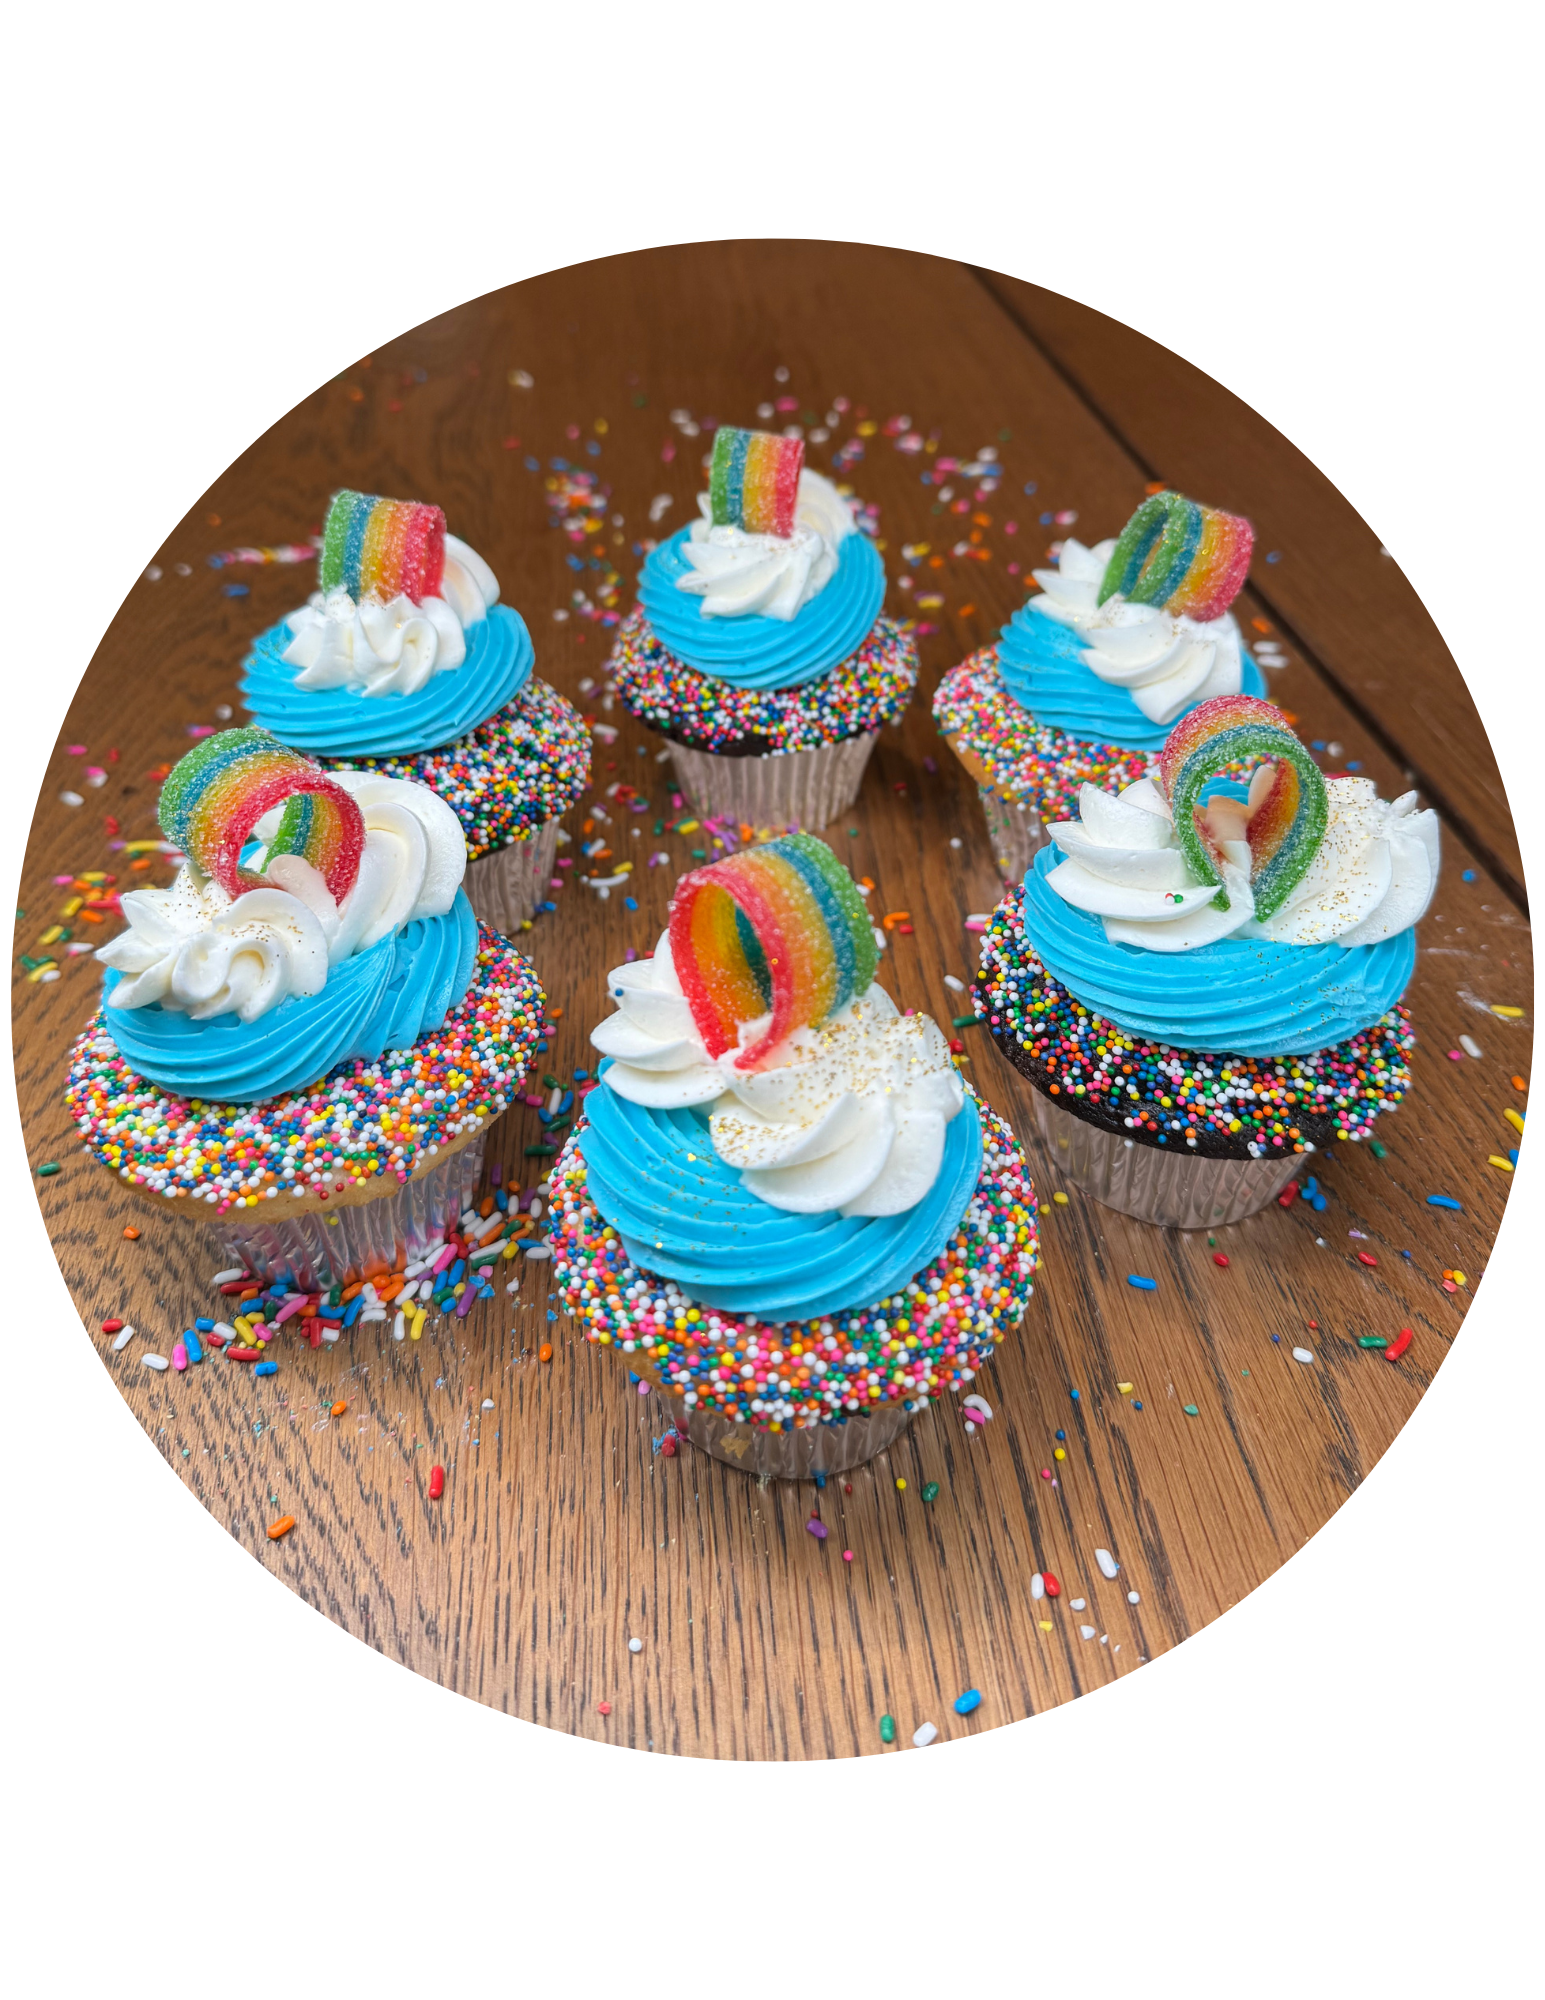 Vanilla and Chocolate Cupcakes with Rainbow toppers